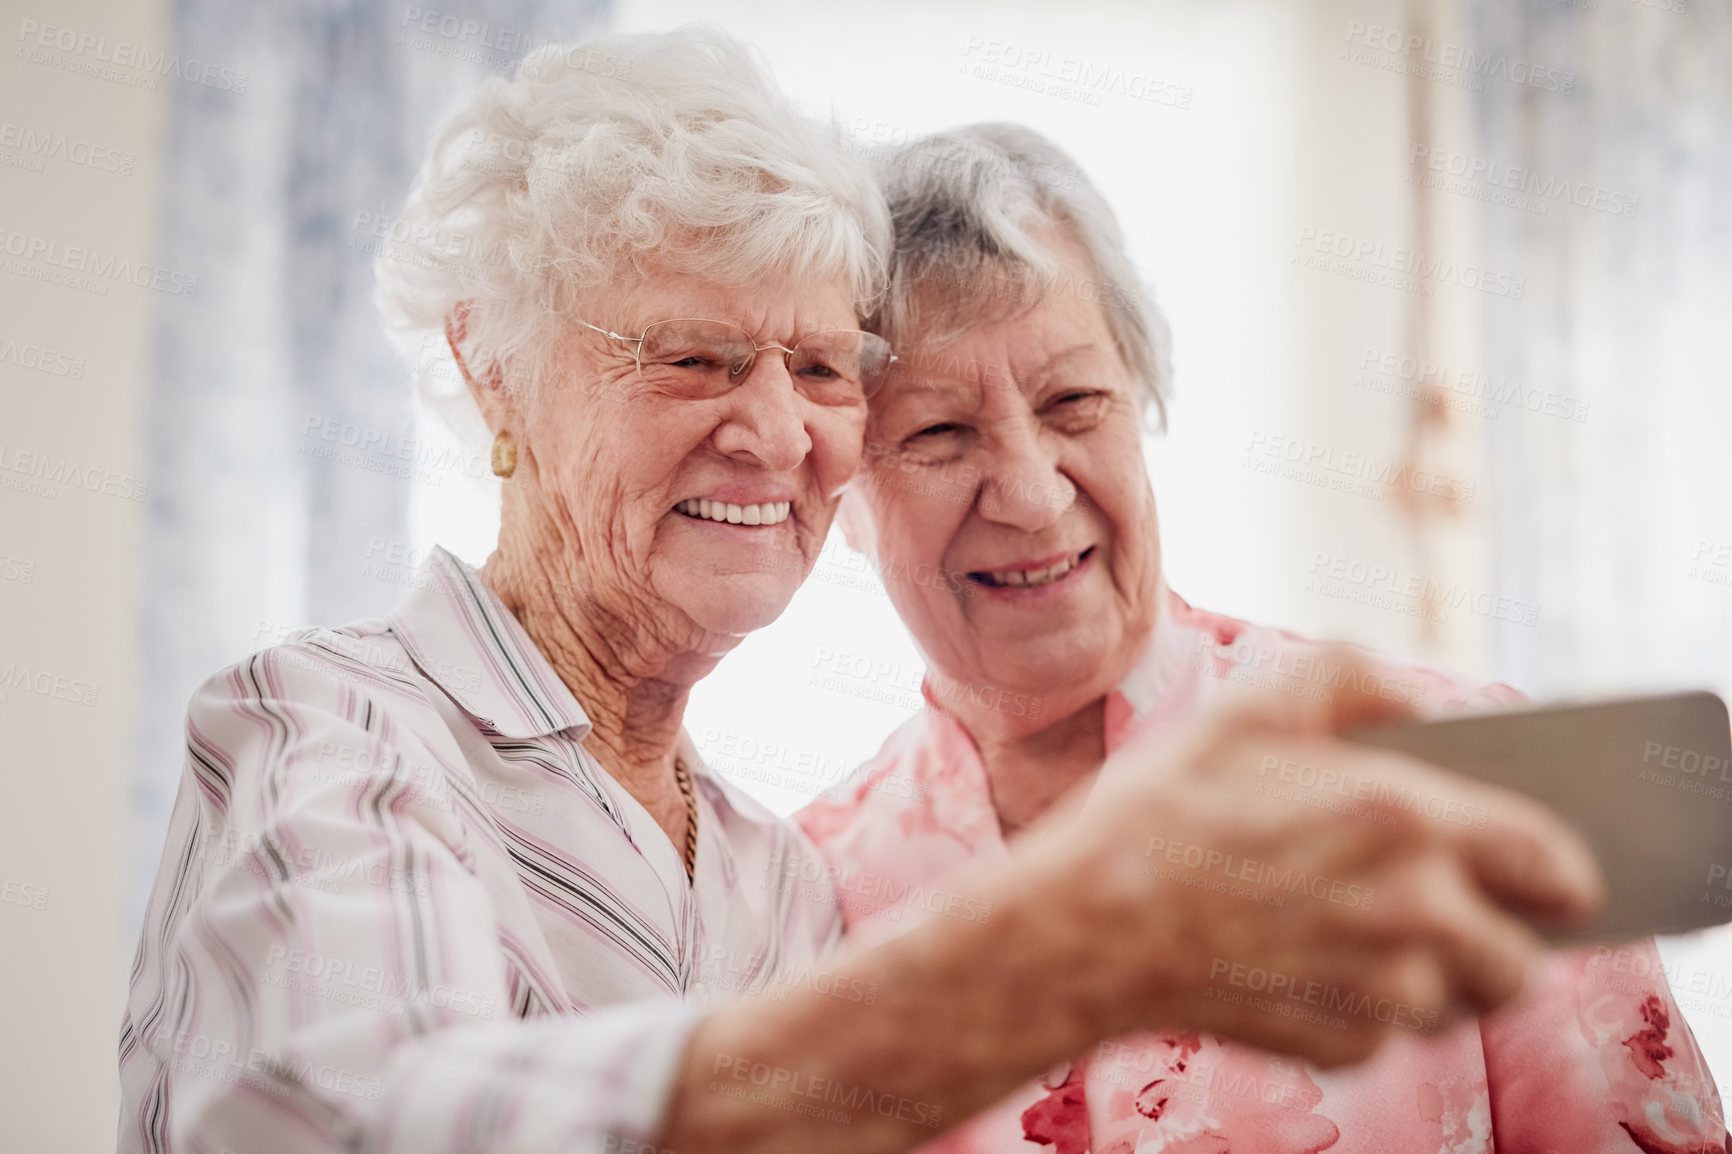 Buy stock photo Portrait of two happy elderly women taking selfies together on a mobile phone